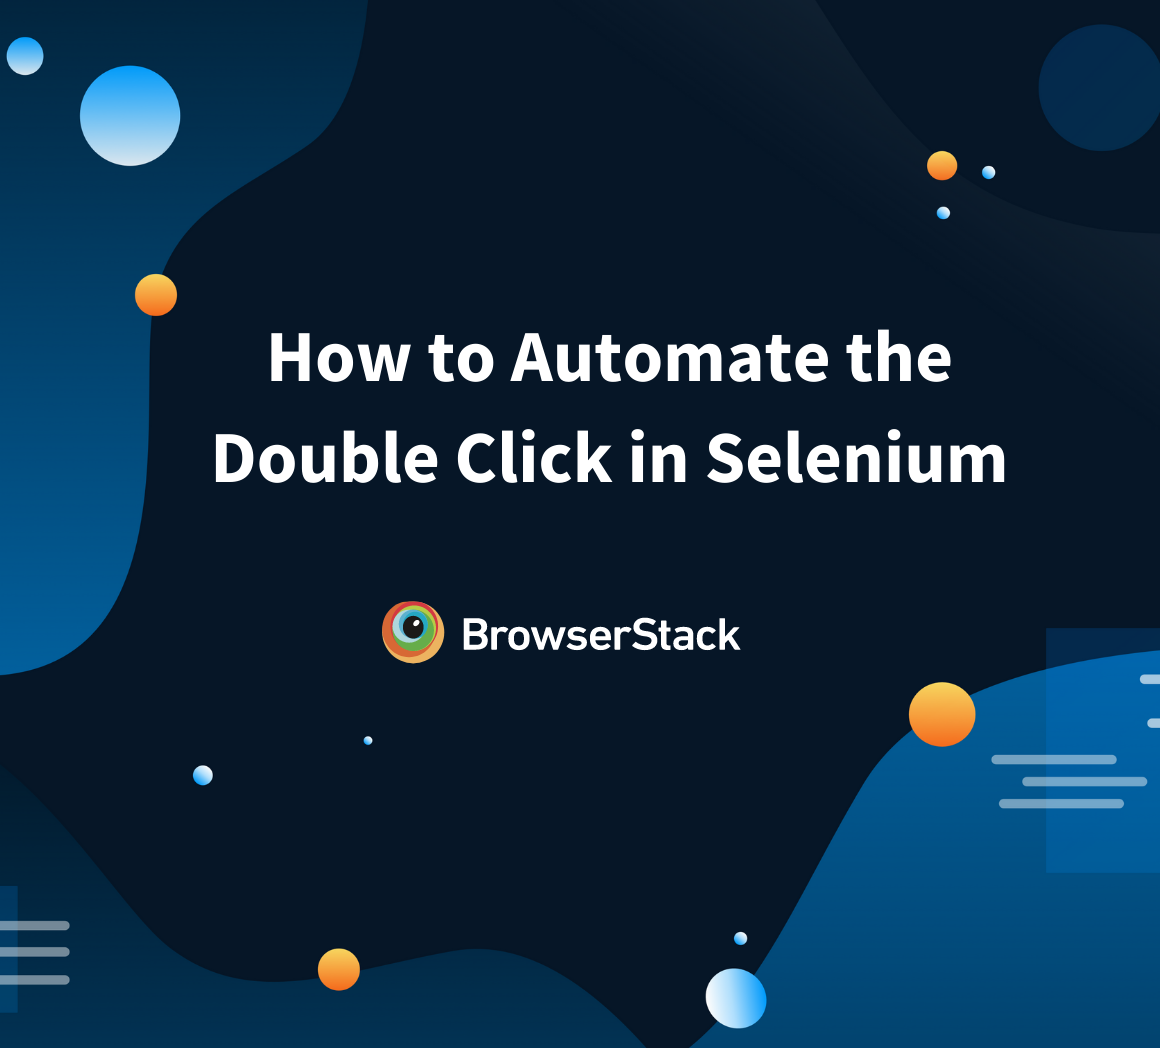 How to Automate the Double Click in Selenium